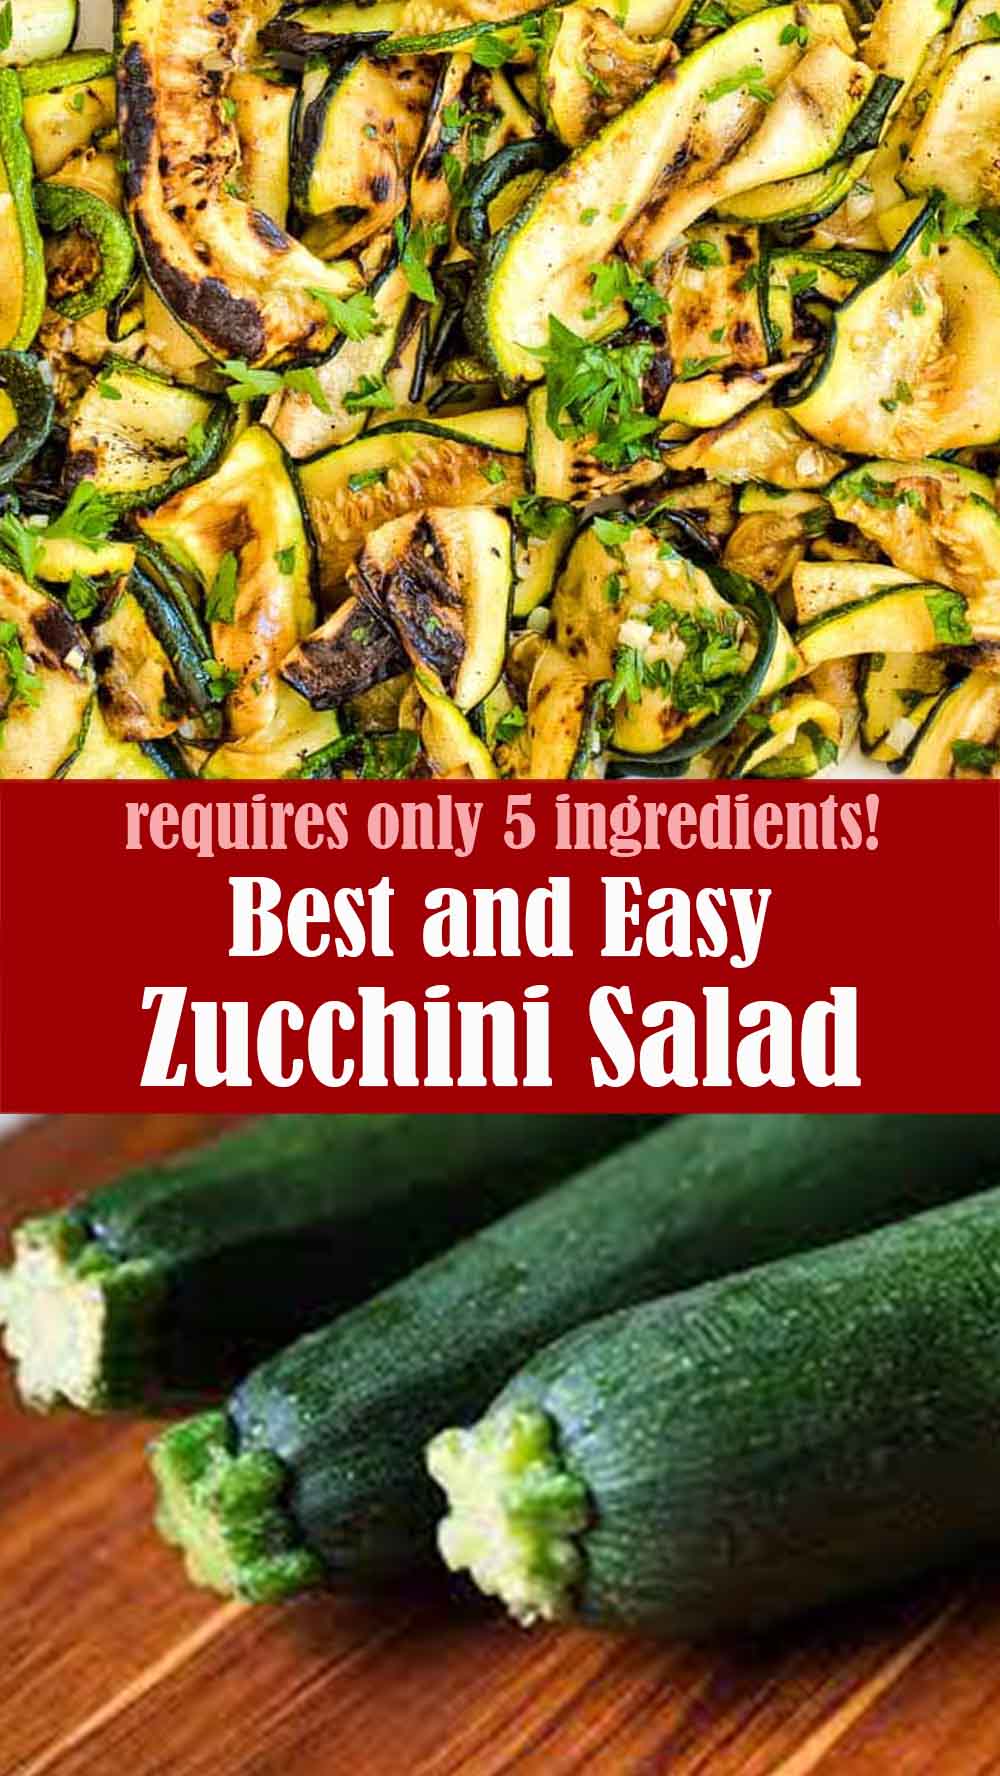 Best and Easy Zucchini Salad Recipe